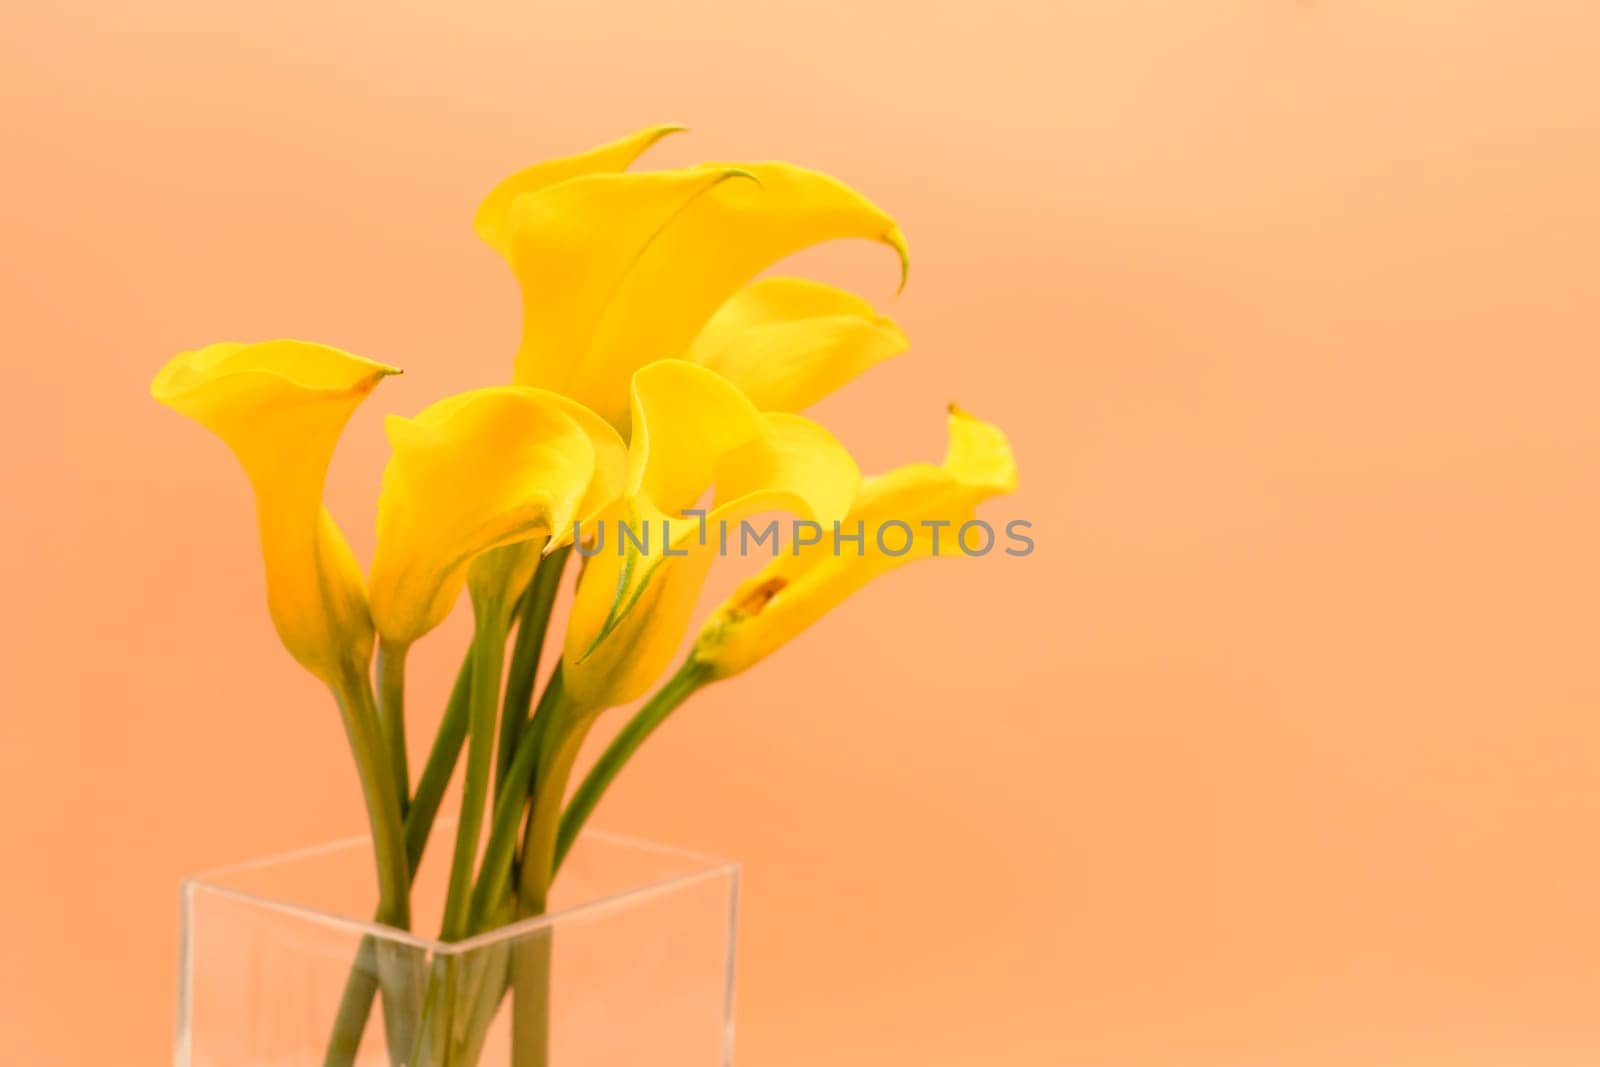 Design Beautiful Yellow Zantedeschia Flower In Glass Vase, Calla Lily Or Arum Lily Lovely Bouquet On Yellow Peach Background. Vertical Plane. Floral pattern, Template Botany. Copy Space. Horizontal.